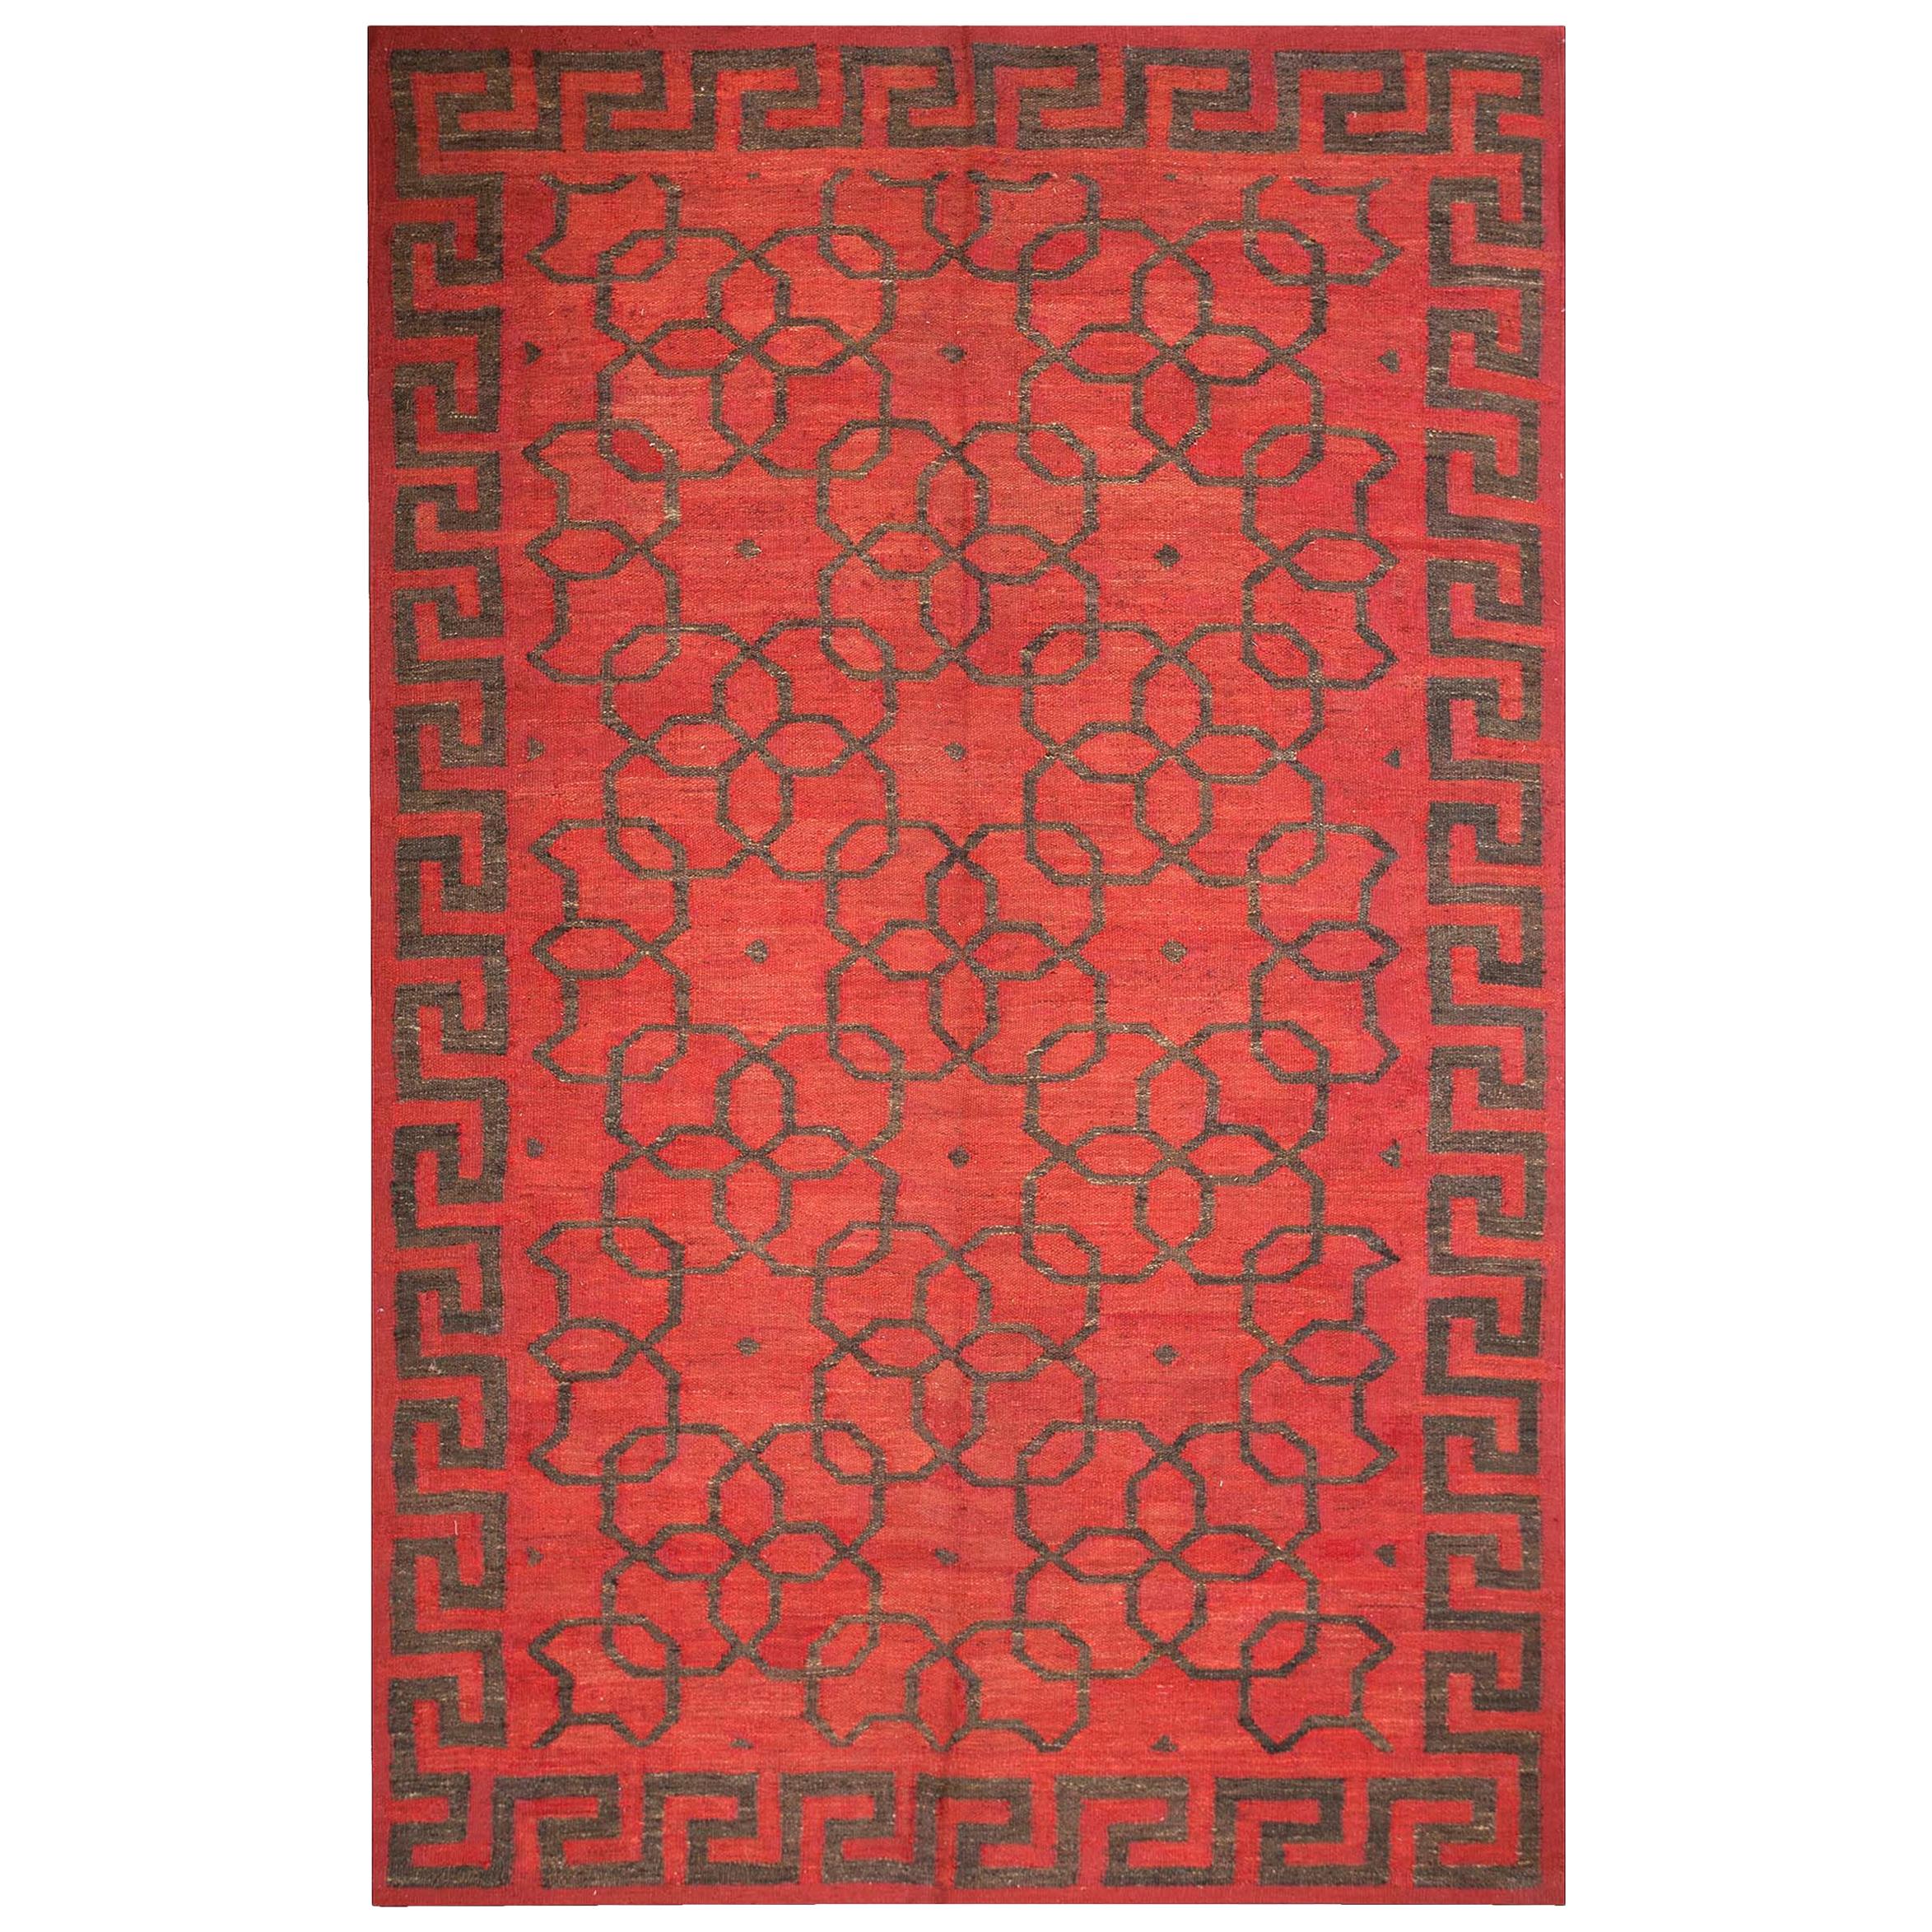 Early 20th Century Indian Woolen Dhurrie Carpet ( 7'3" x 11'8" - 222 x 355 )